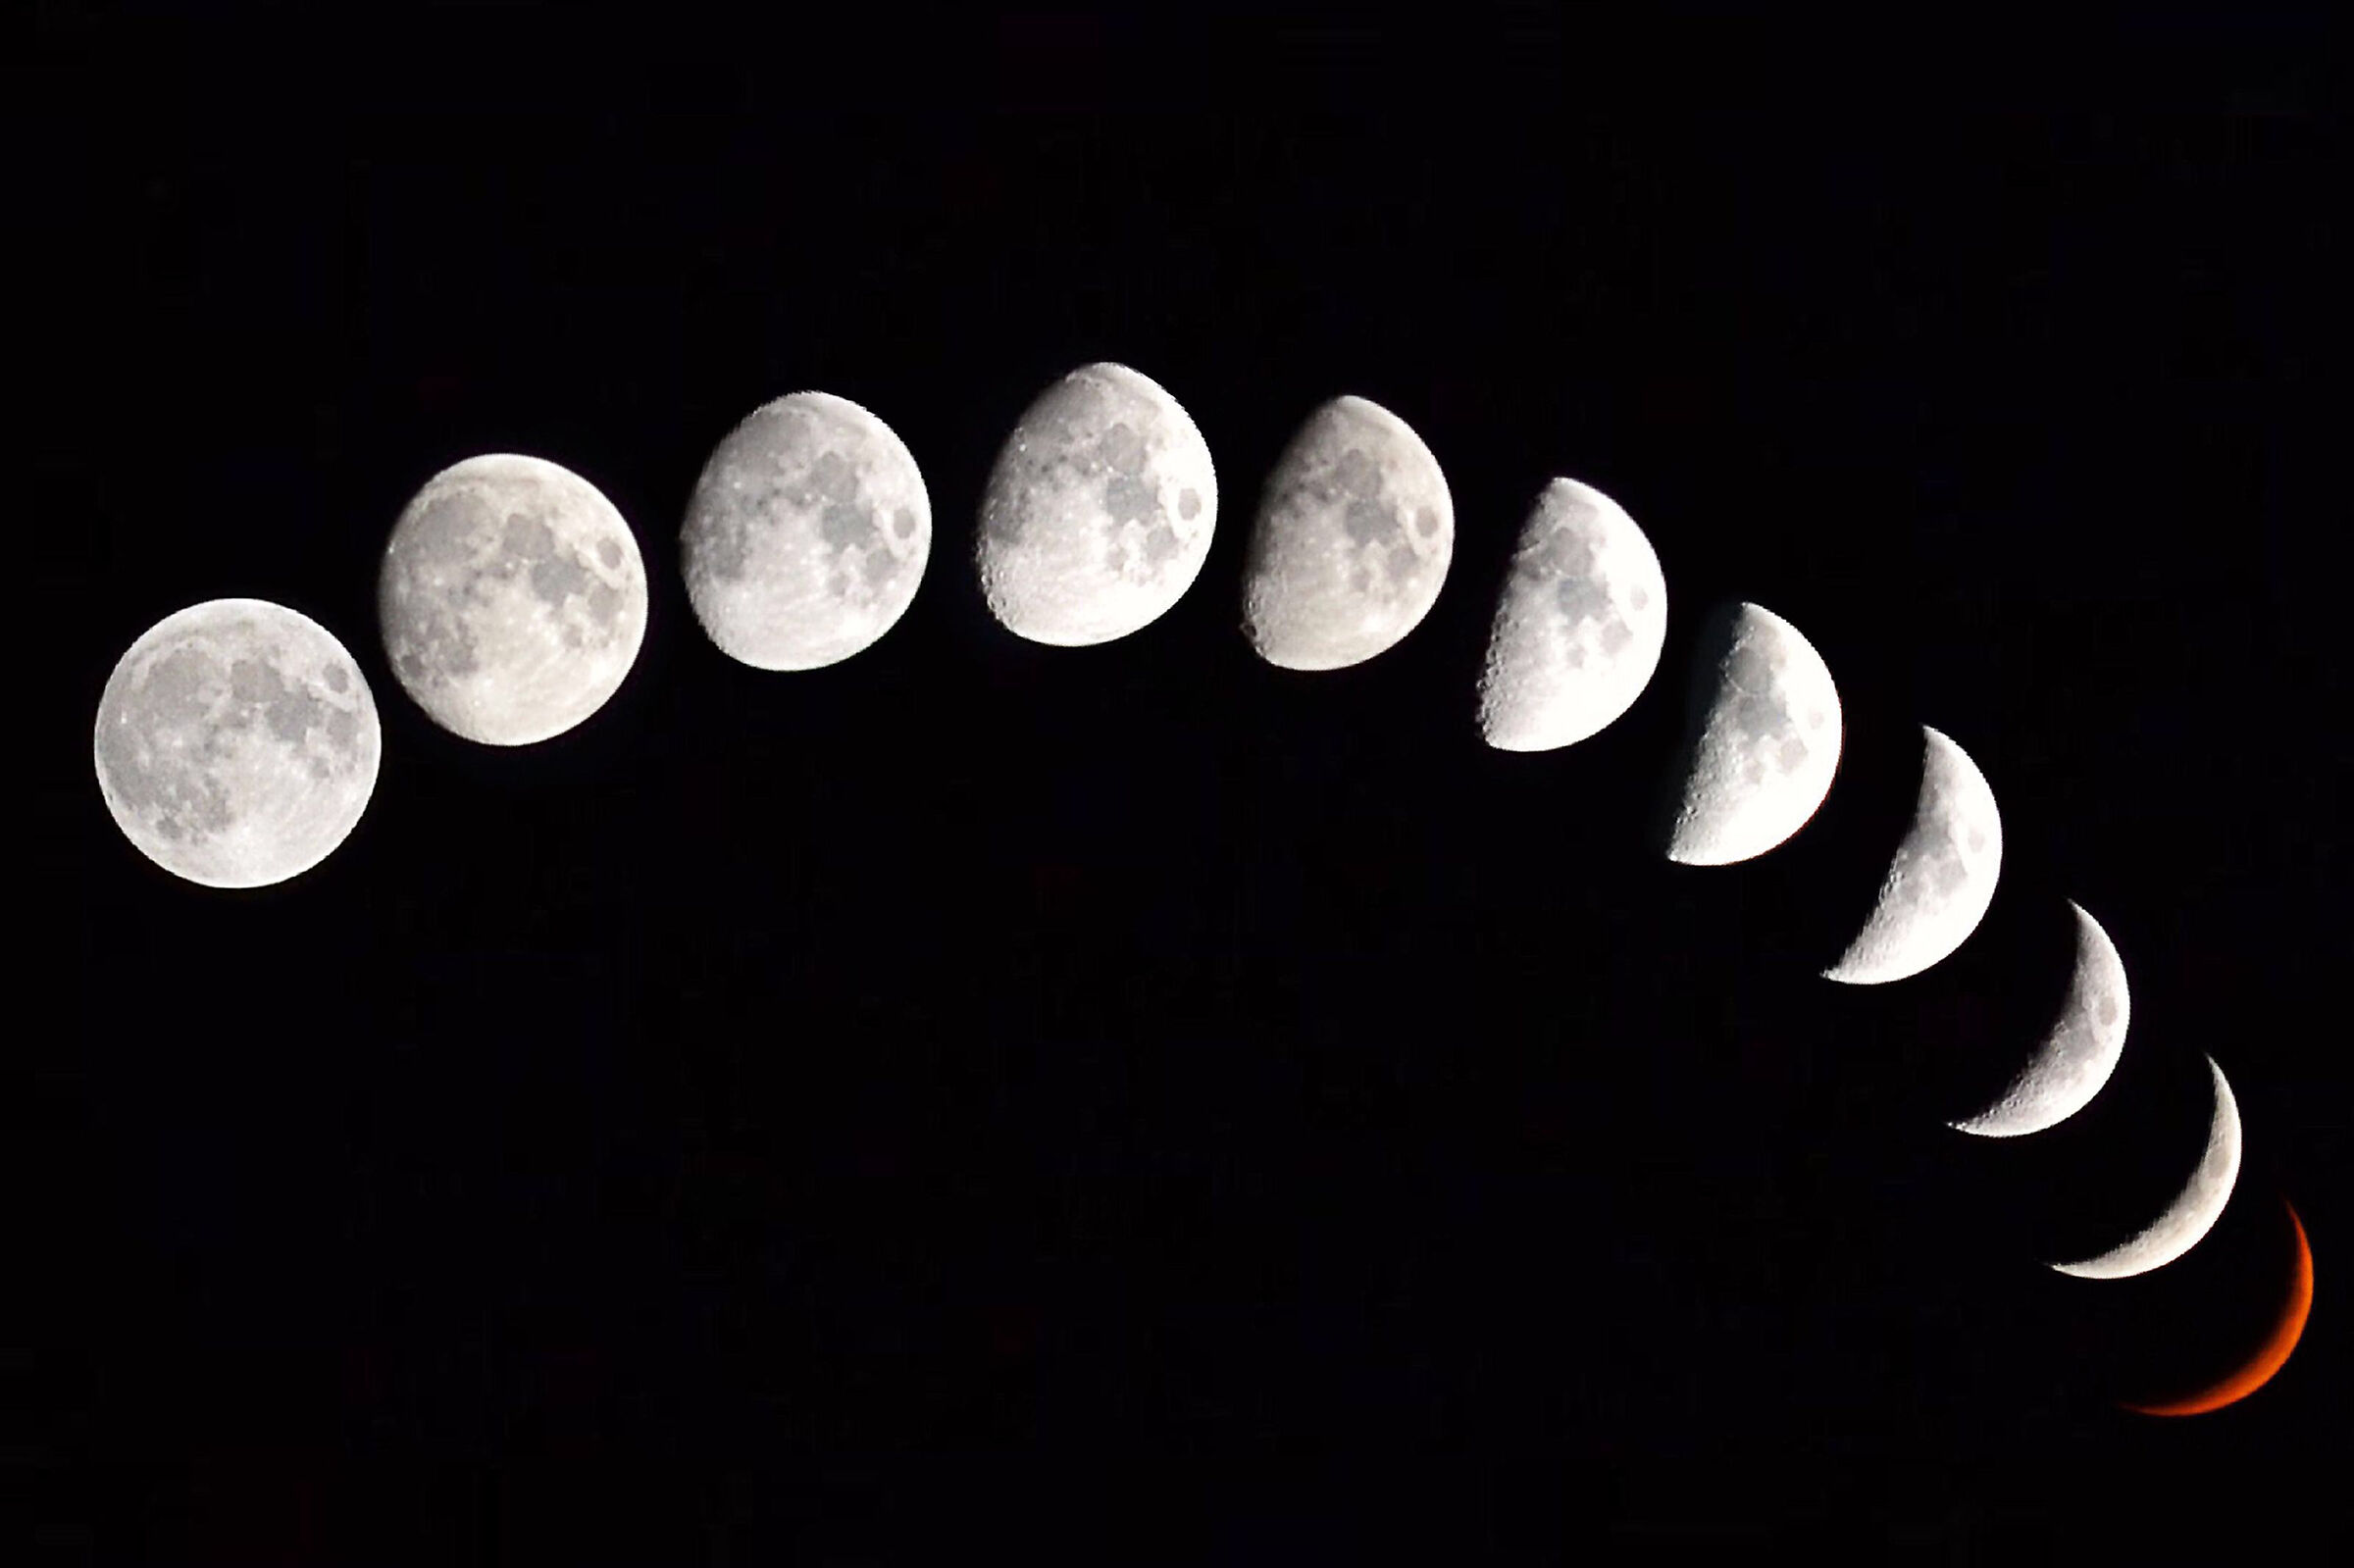 The many faces of the moon...